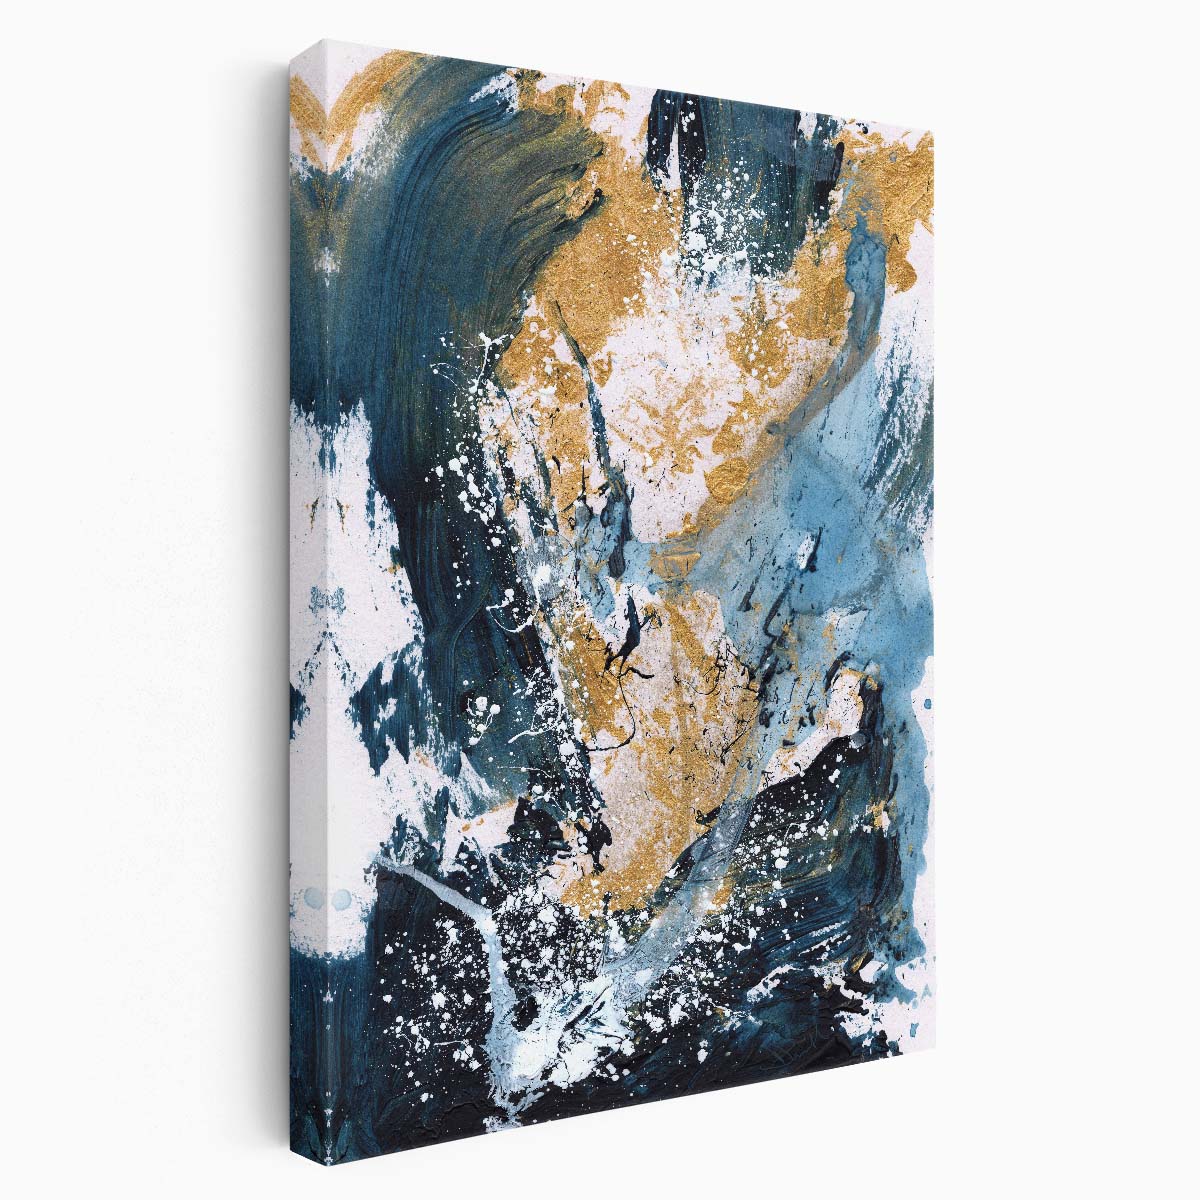 Dan Hobday's Contemporary Golden Blue Abstract Illustration Art by Luxuriance Designs, made in USA